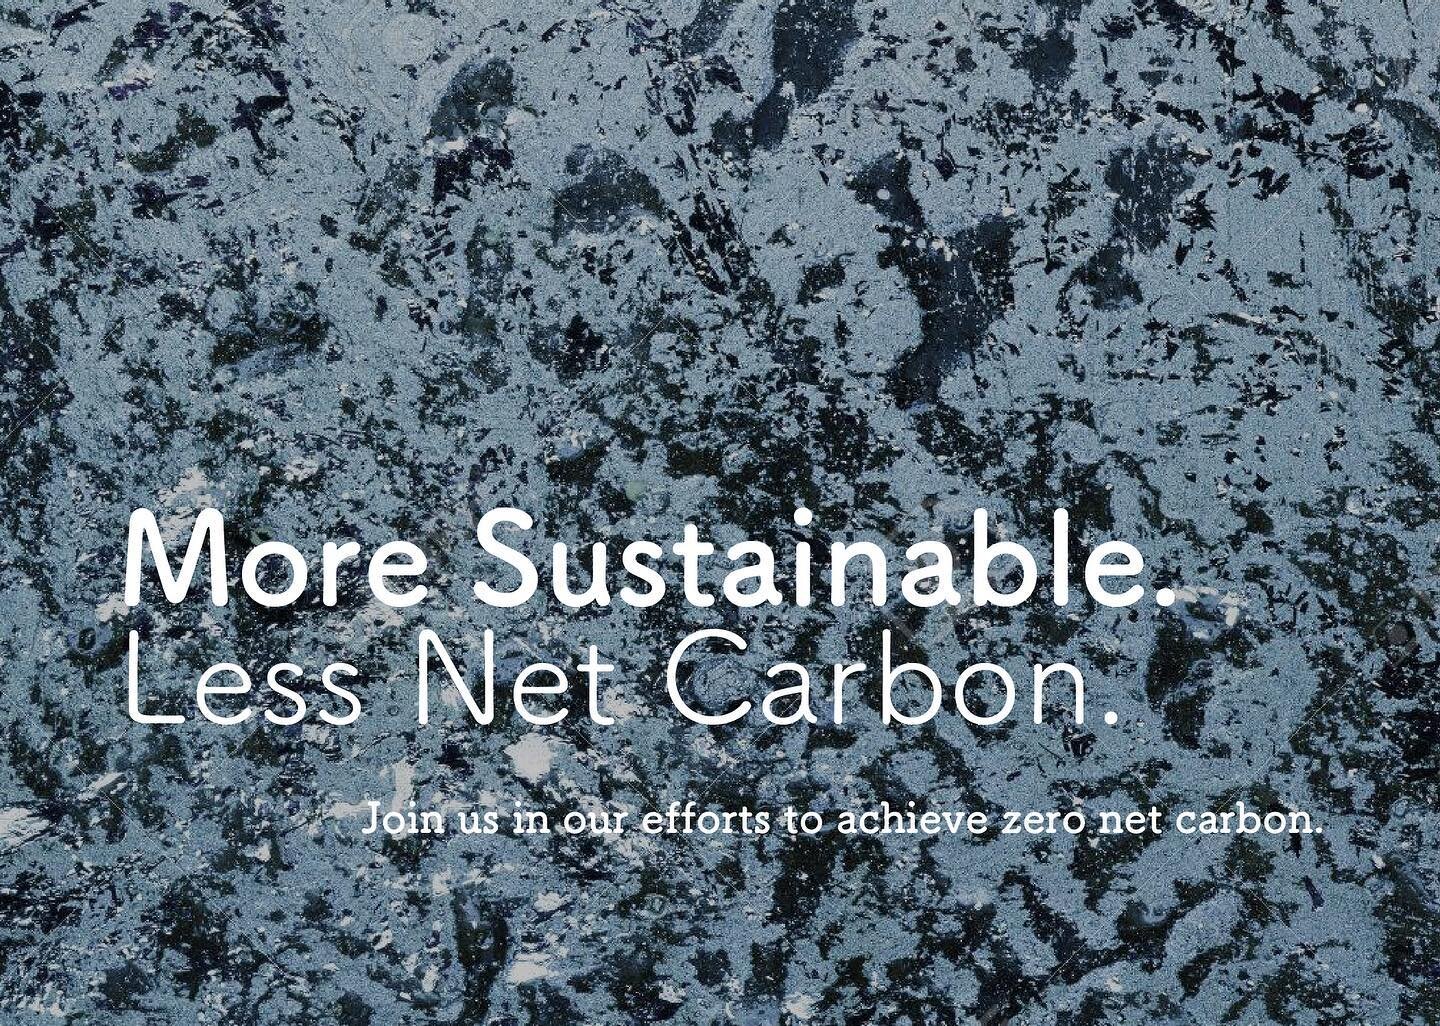 More Sustainable. 
Less Net Carbon. 

Join us in our efforts to achieve zero net carbon. 

&bull;
&bull;
&bull;
&bull;
&bull;

#ocean #oceans #oceanconservation #plasticfree #turtles #ecofriendly #savetheocean #metalstraw #zerowaste #plasticpollution